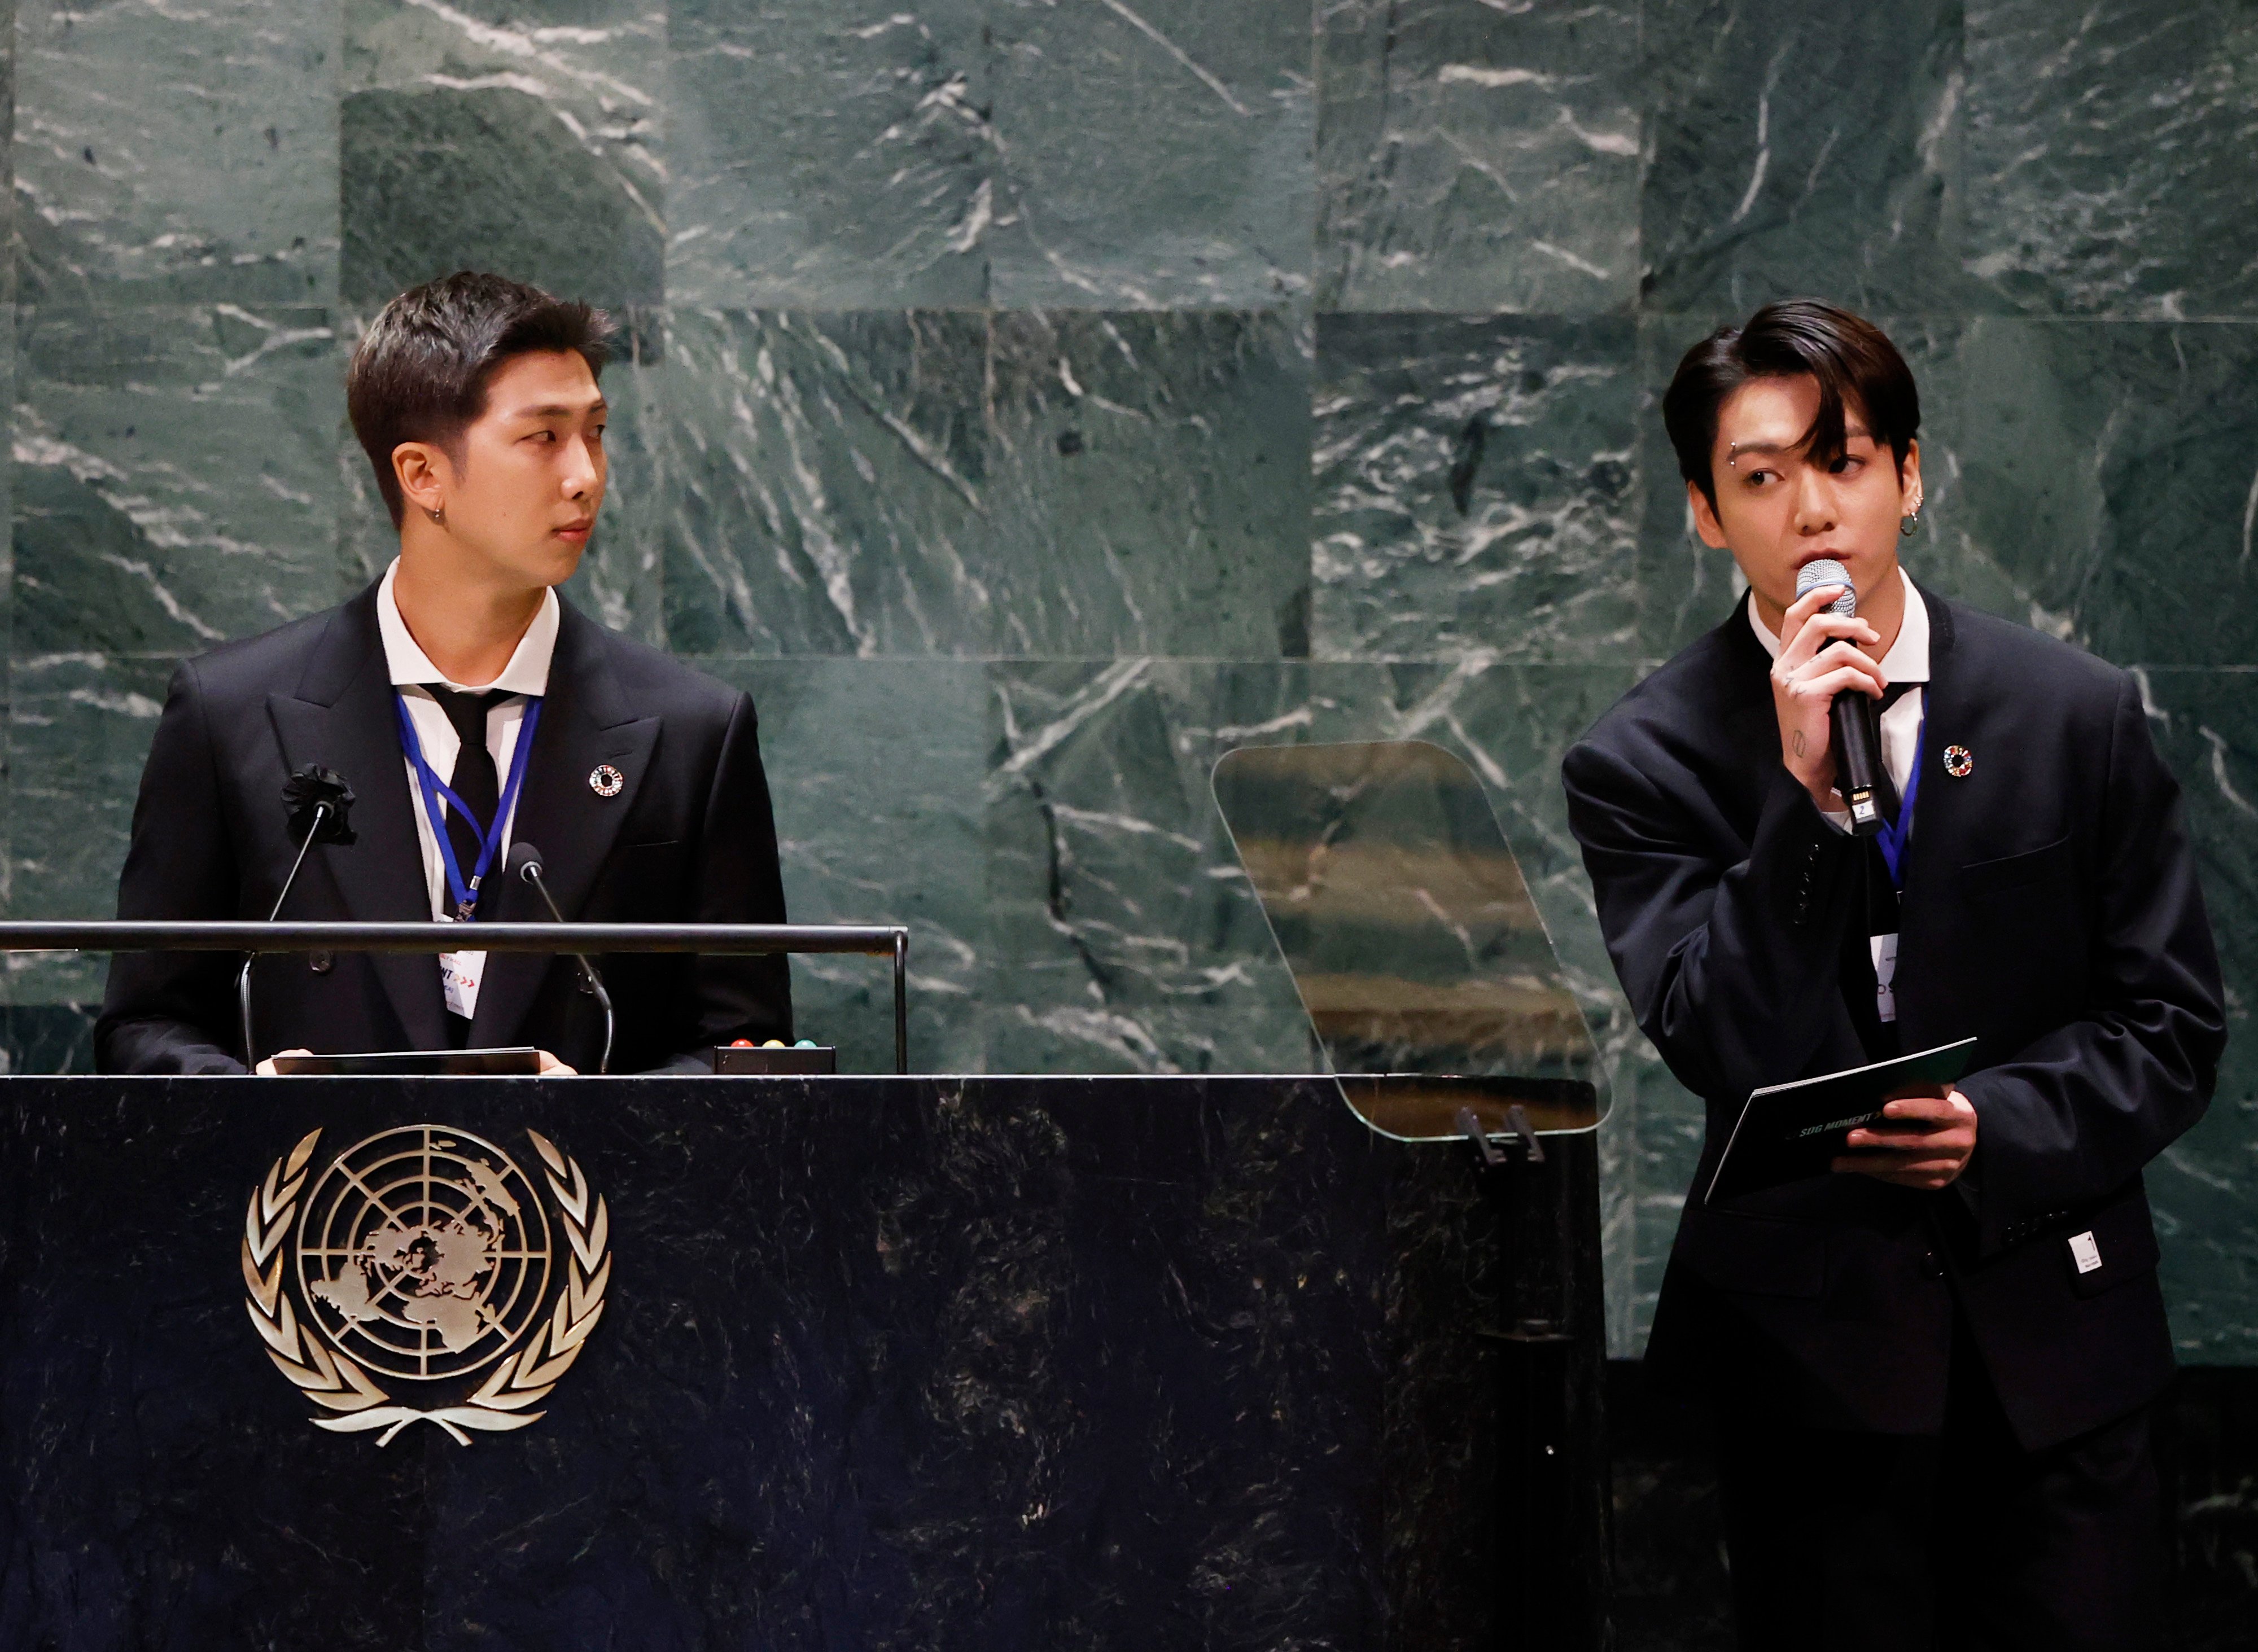 RM listens as Jungkook of the boy band BTS speaks at the SDG Moment event 